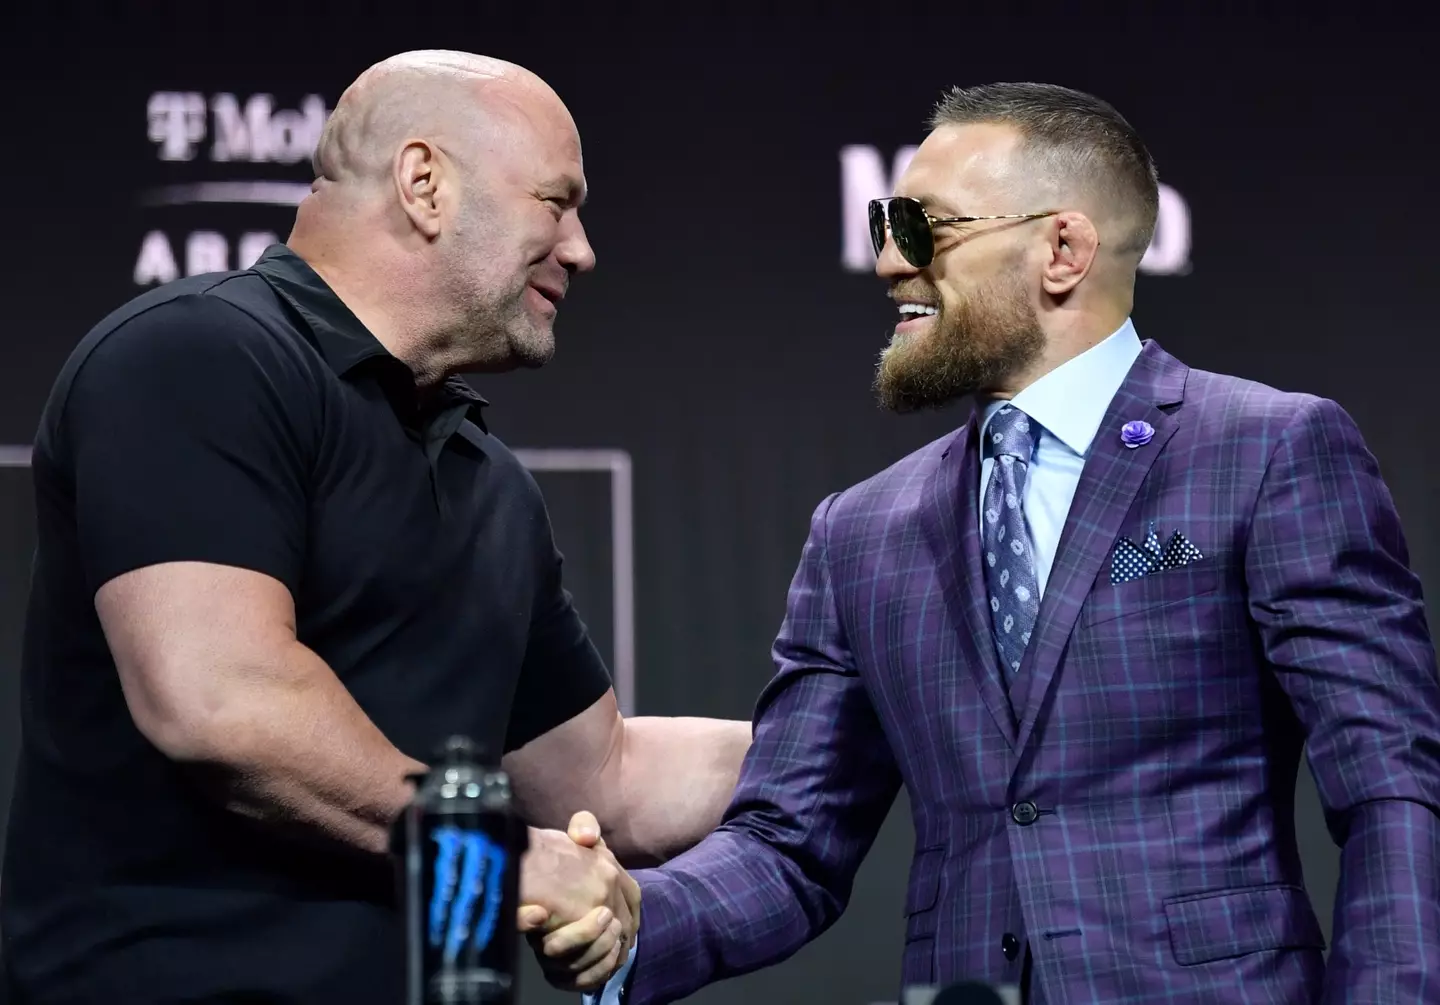 Dana White and Conor McGregor at the UFC press conference.Image: Getty